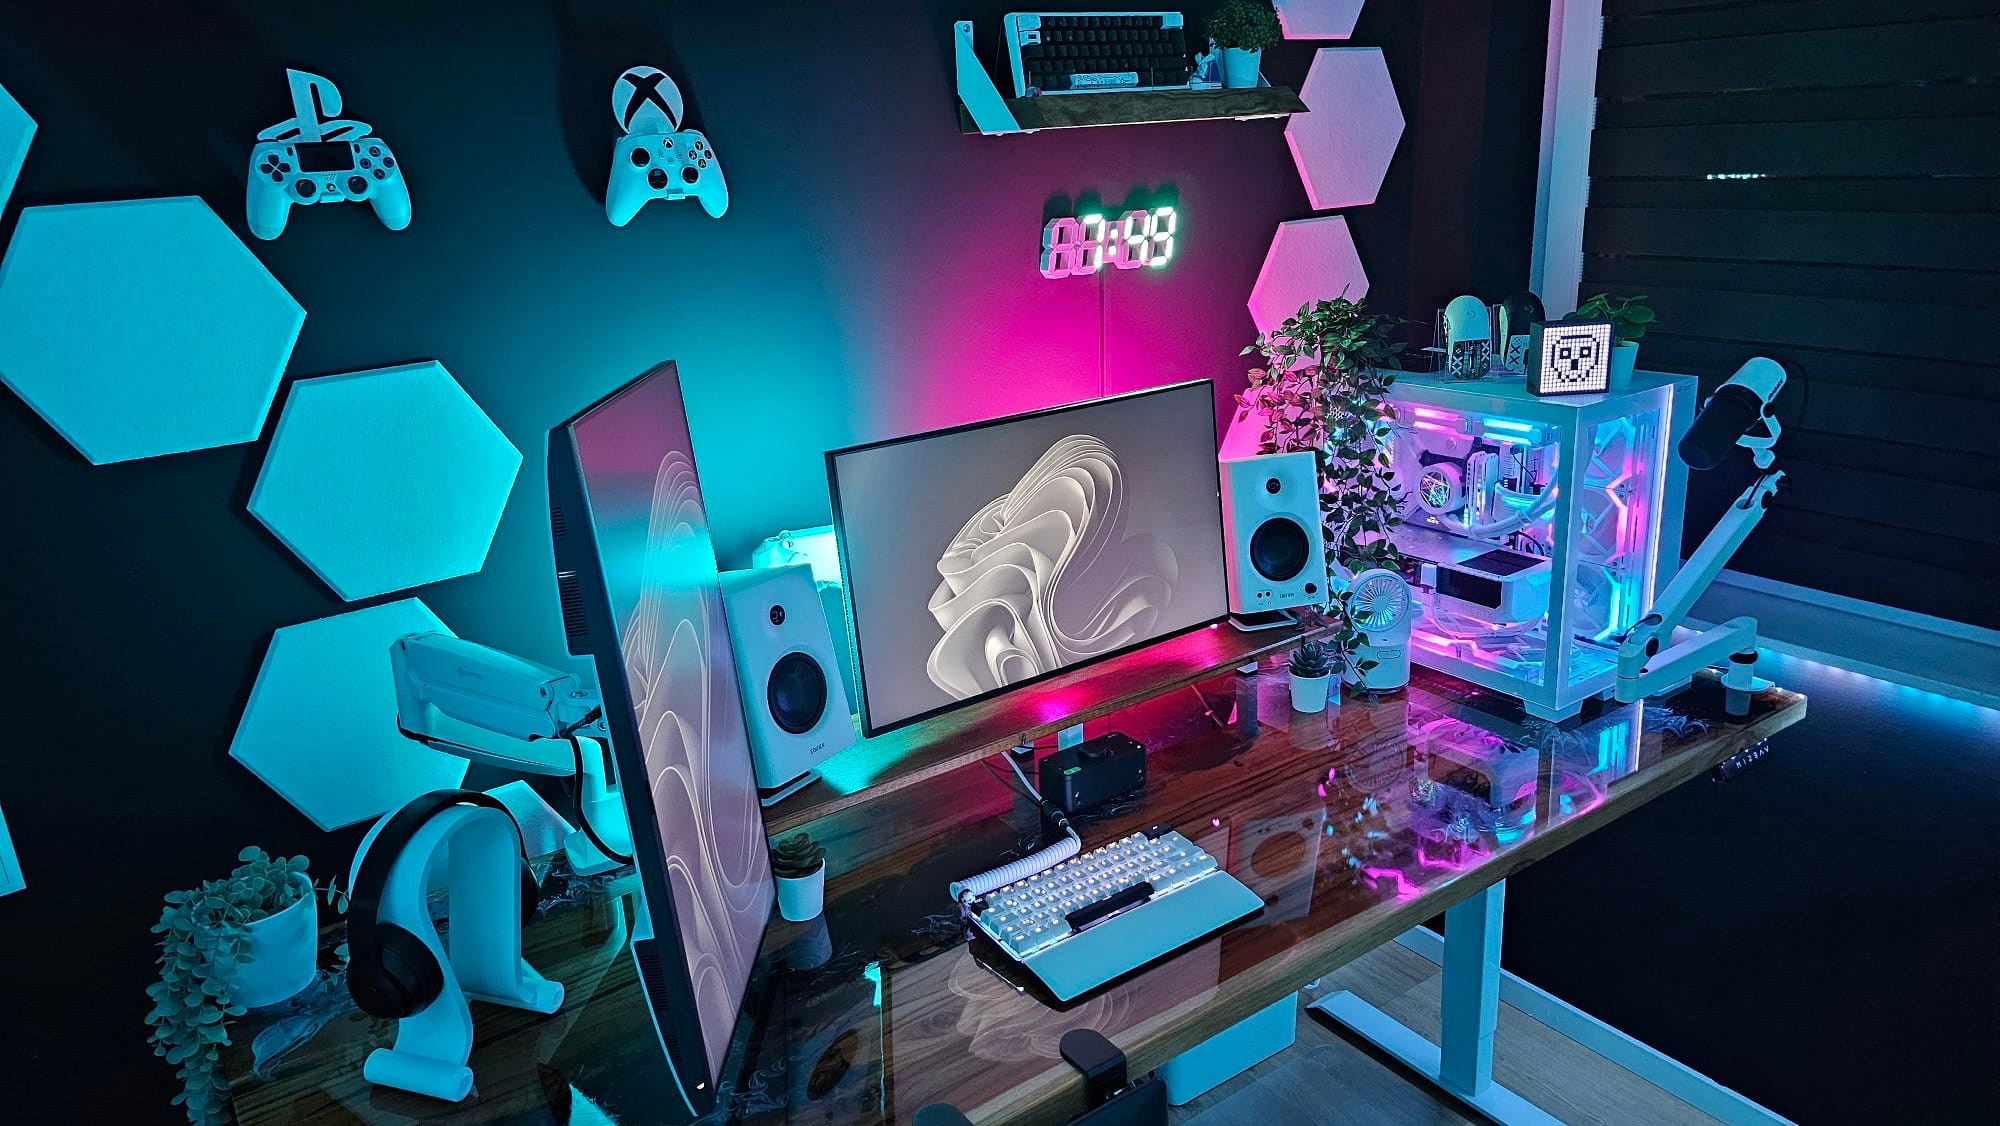 A vibrant gaming setup with neon lighting, featuring a dual monitor configuration, a white mechanical keyboard, a custom-built PC with RGB lighting, speakers, gaming controllers, and a digital clock on a dark wall adorned with geometric panels